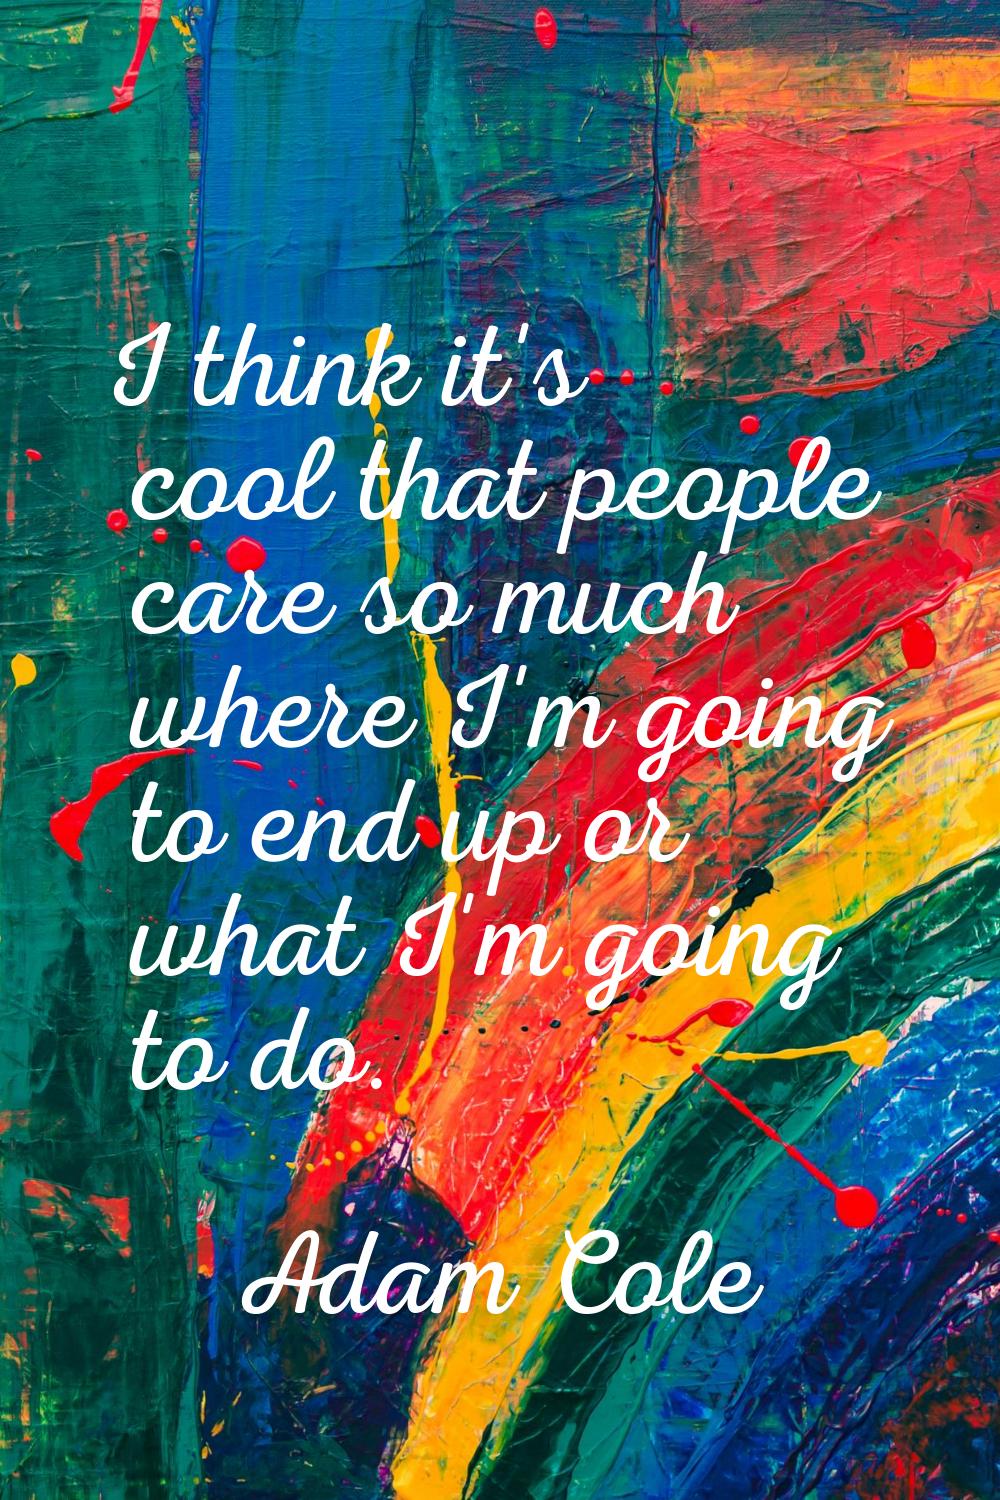 I think it's cool that people care so much where I'm going to end up or what I'm going to do.